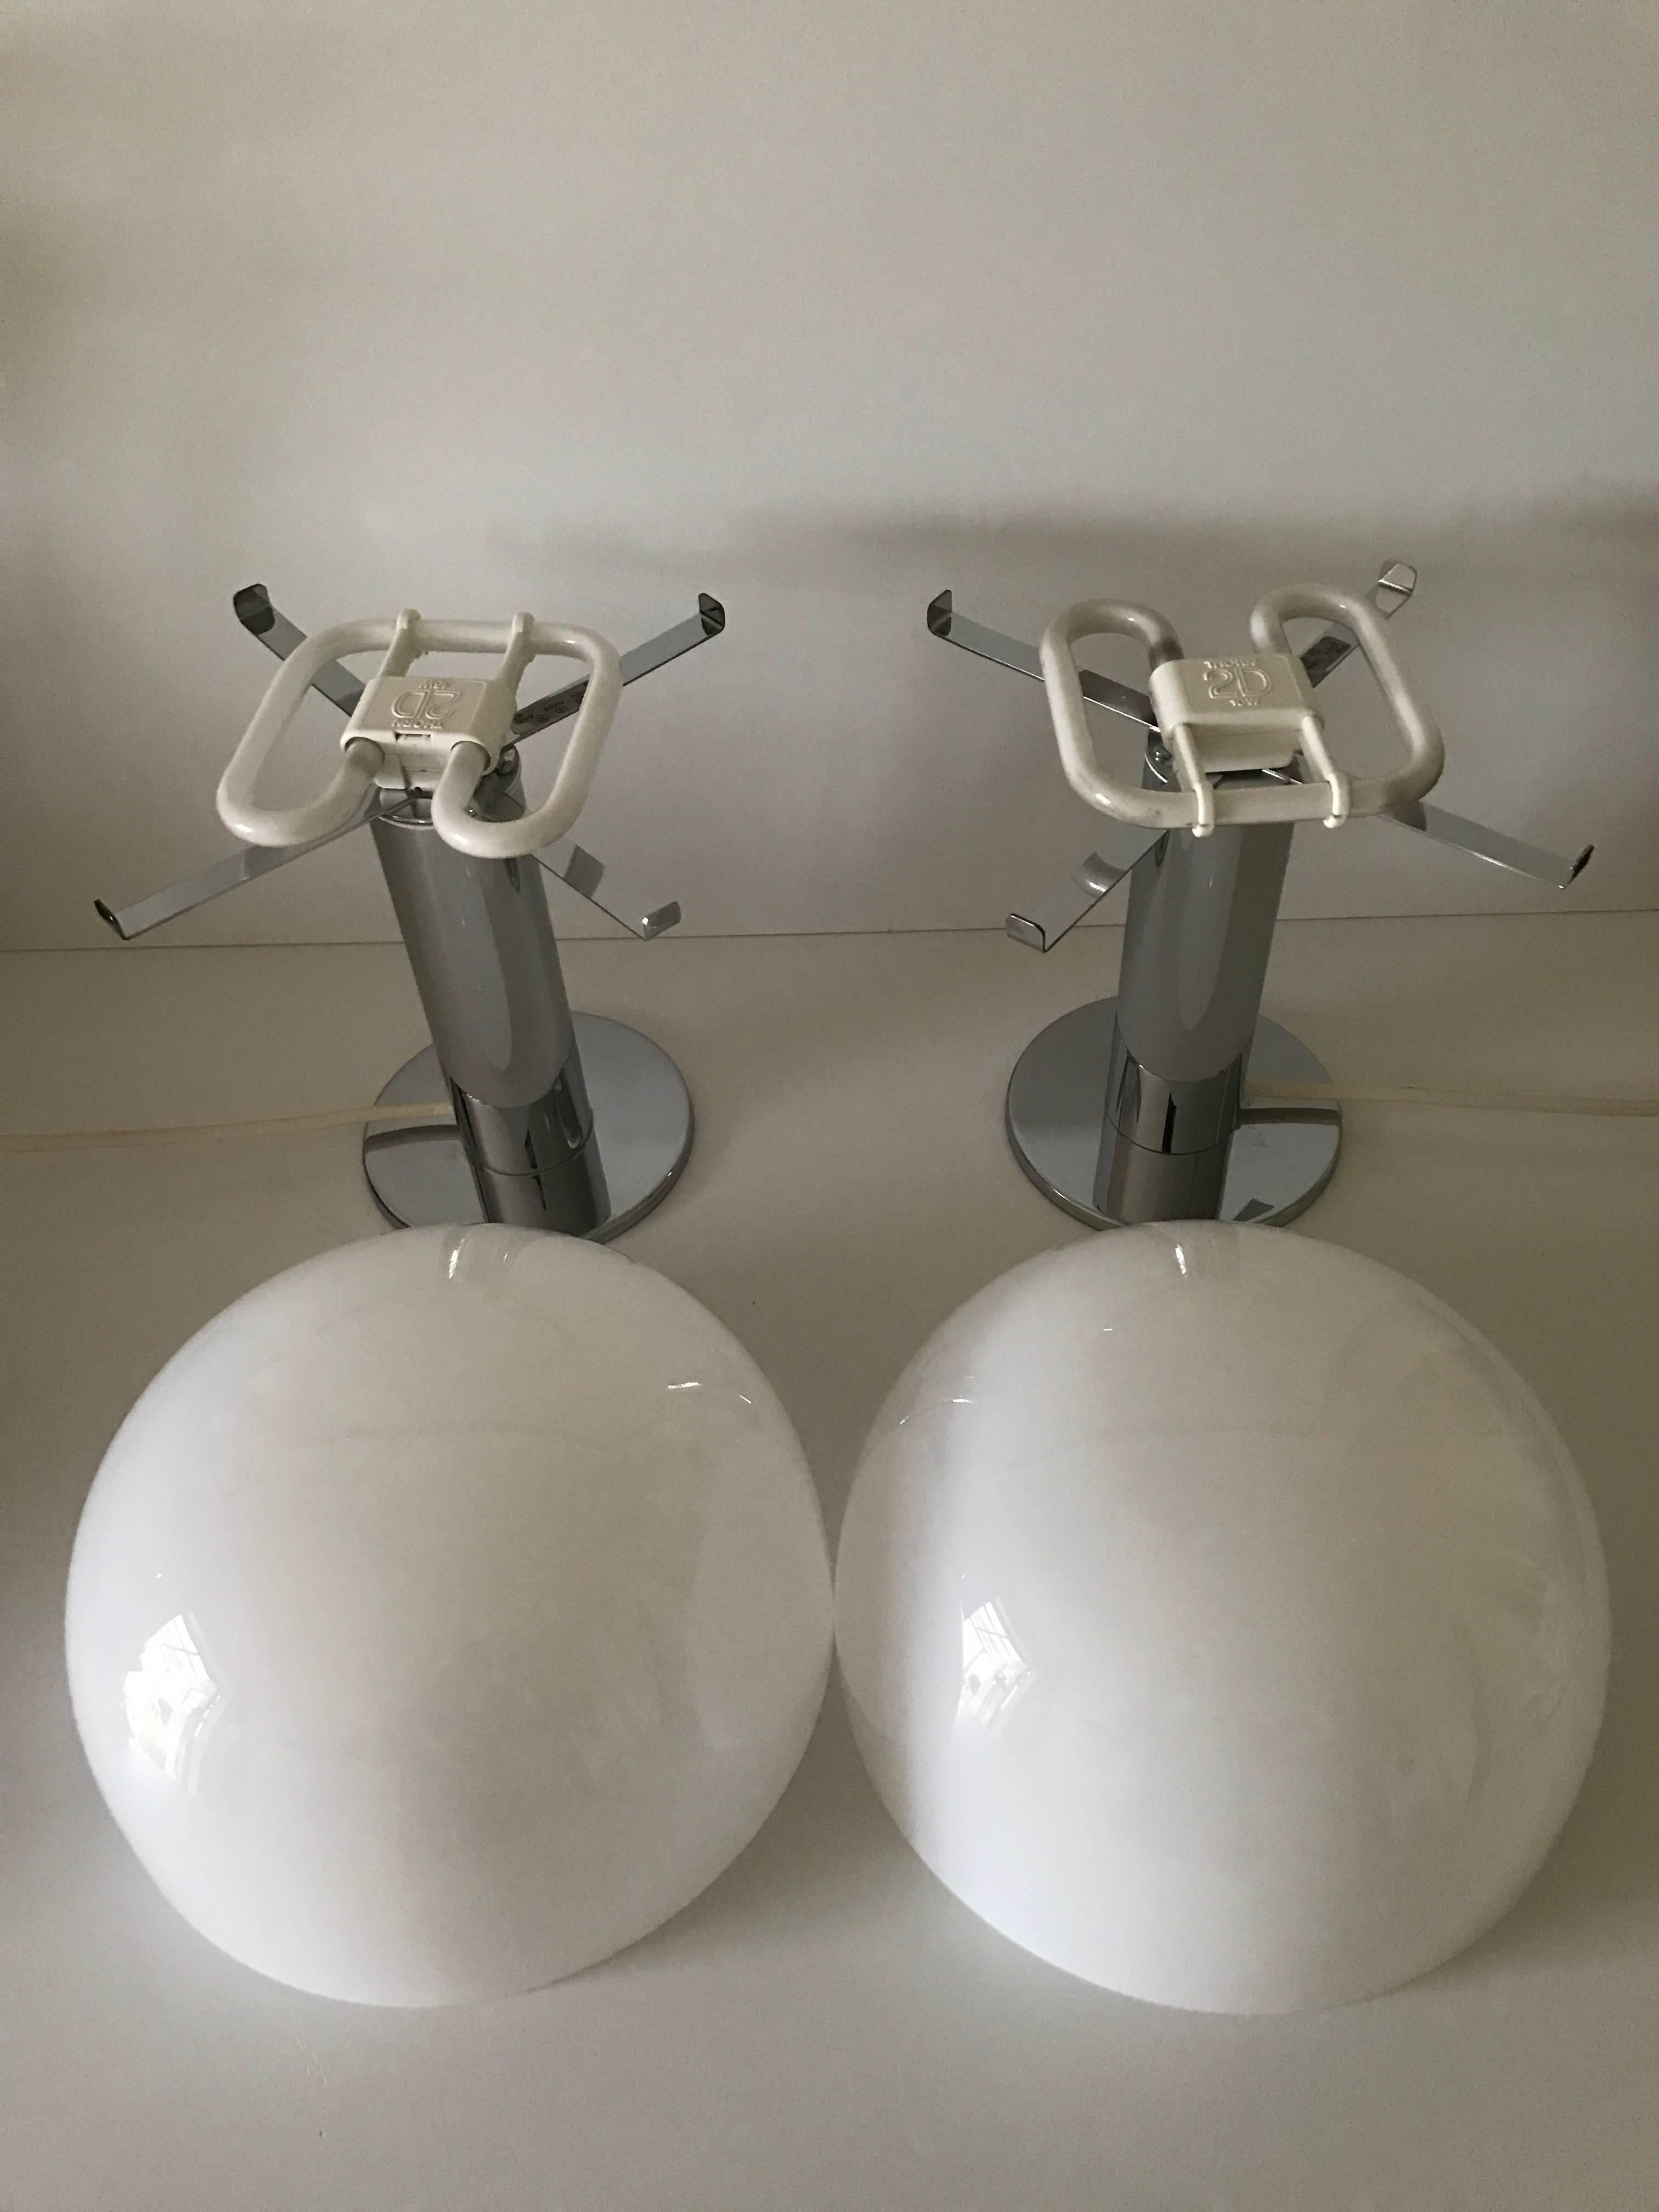 1980 pair of Swedish Falkenberg table lamps, model Taiba.
A nice pair of acrylic, chrome steel table lamps, made by Falkenbergs Belysning In the 1980´s. the condition is perfect without any flaws or damages. The height is 36cm and the diameter of